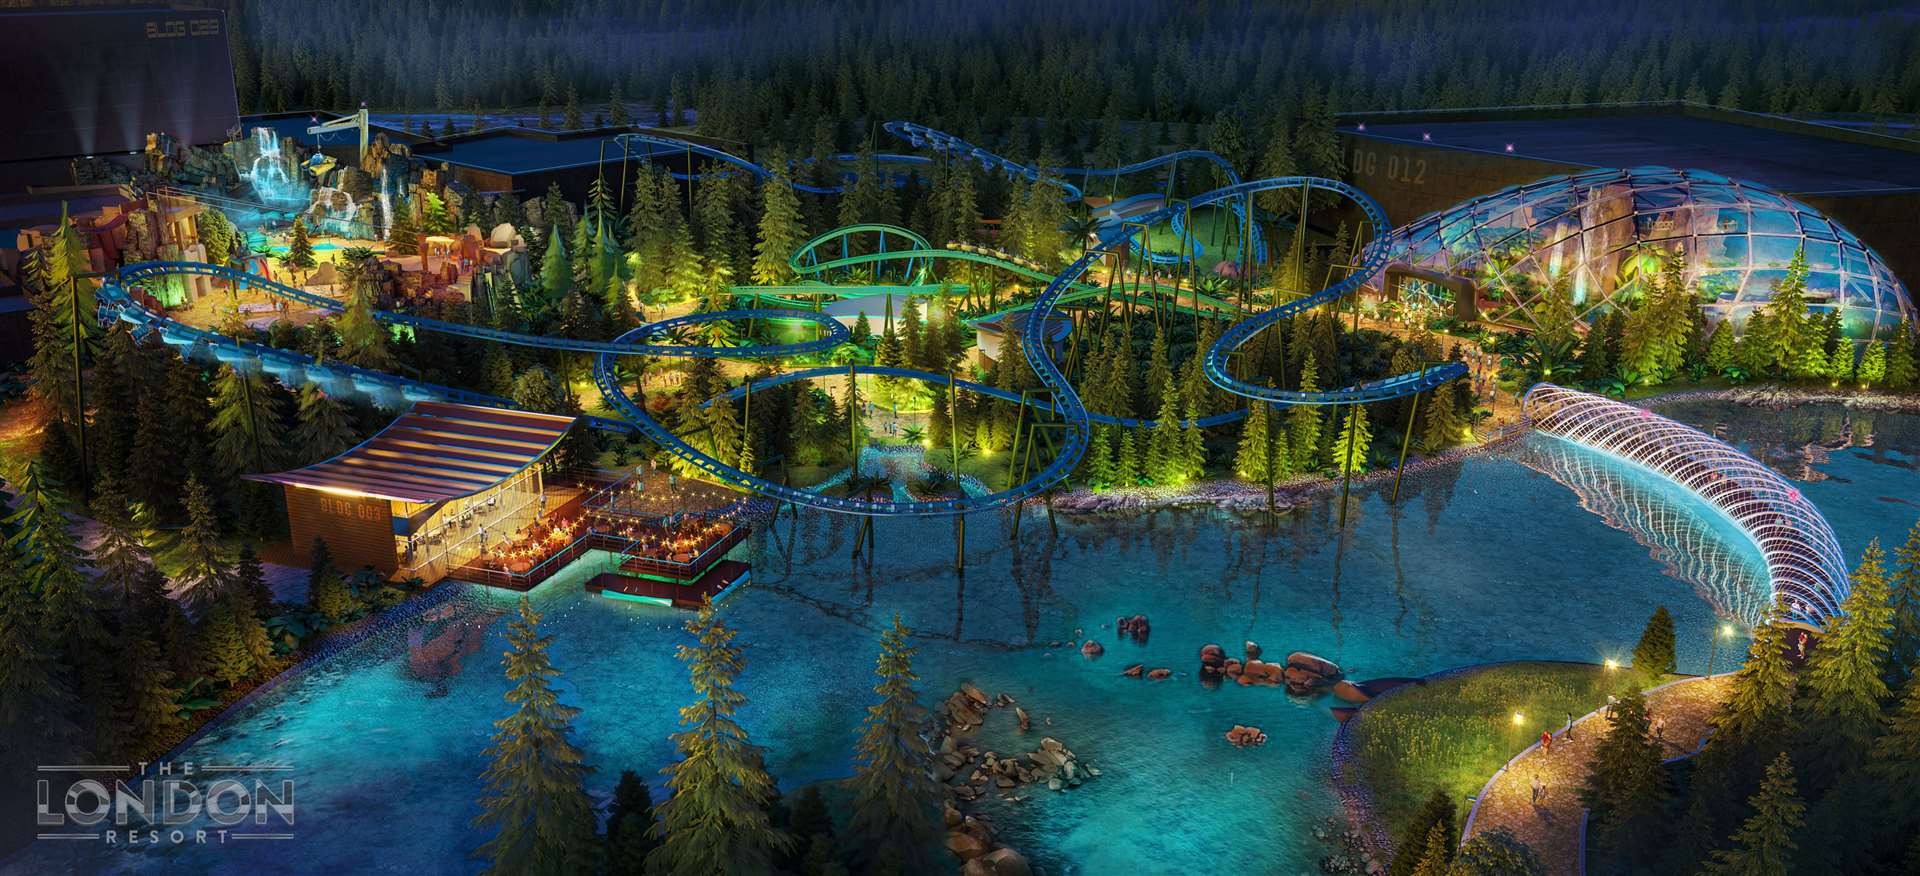 The London Resort has announced a new zone "Base Camp" dedicated to dinosaur and prehistoric discovery